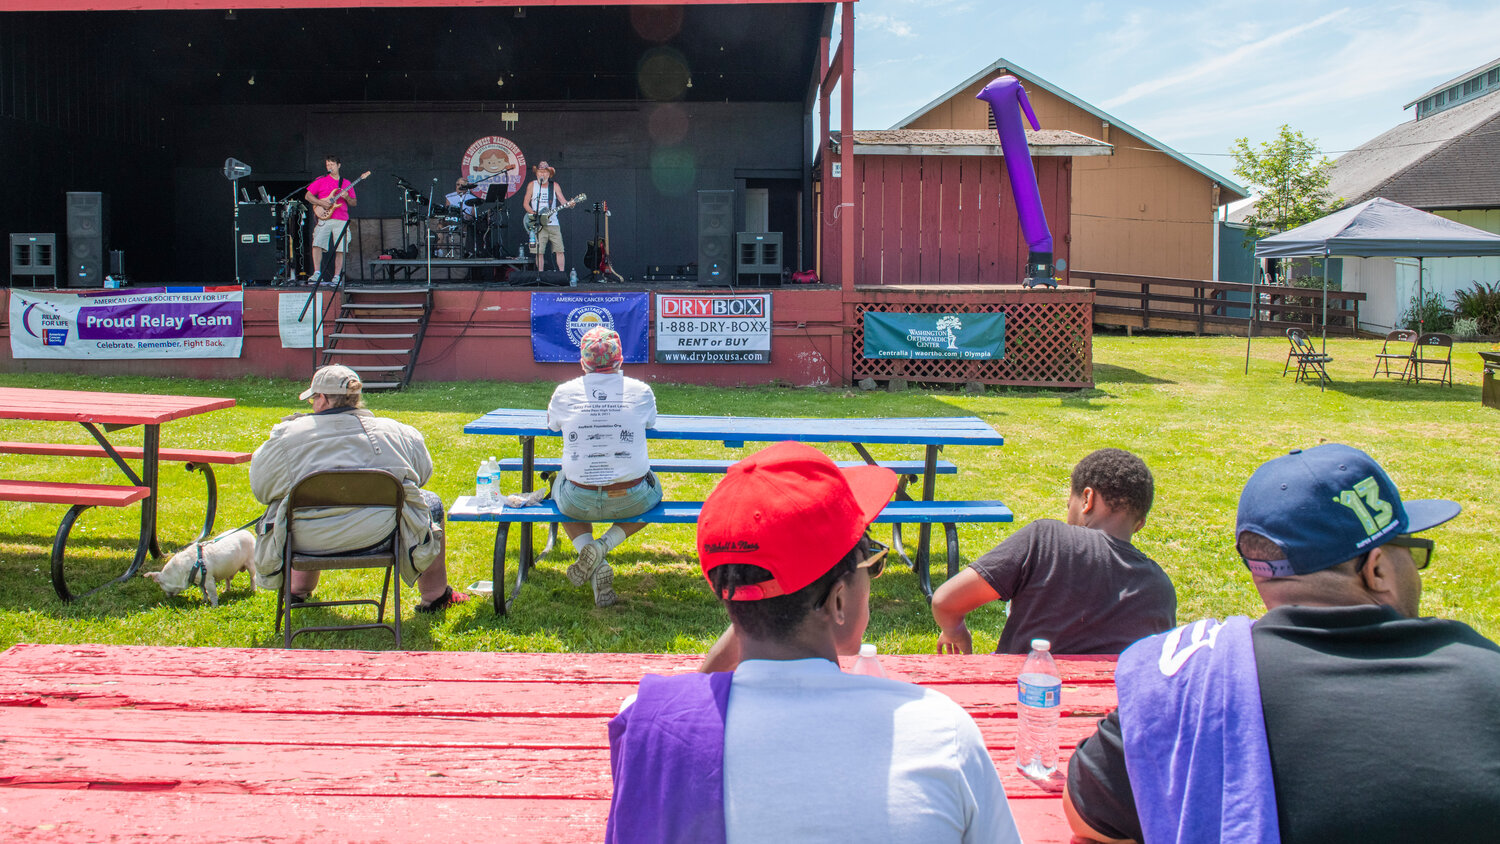 The Backfire Band performs during a Relay For Life survivor walk at the Southwest Washington Fairgrounds on Saturday, May 20.